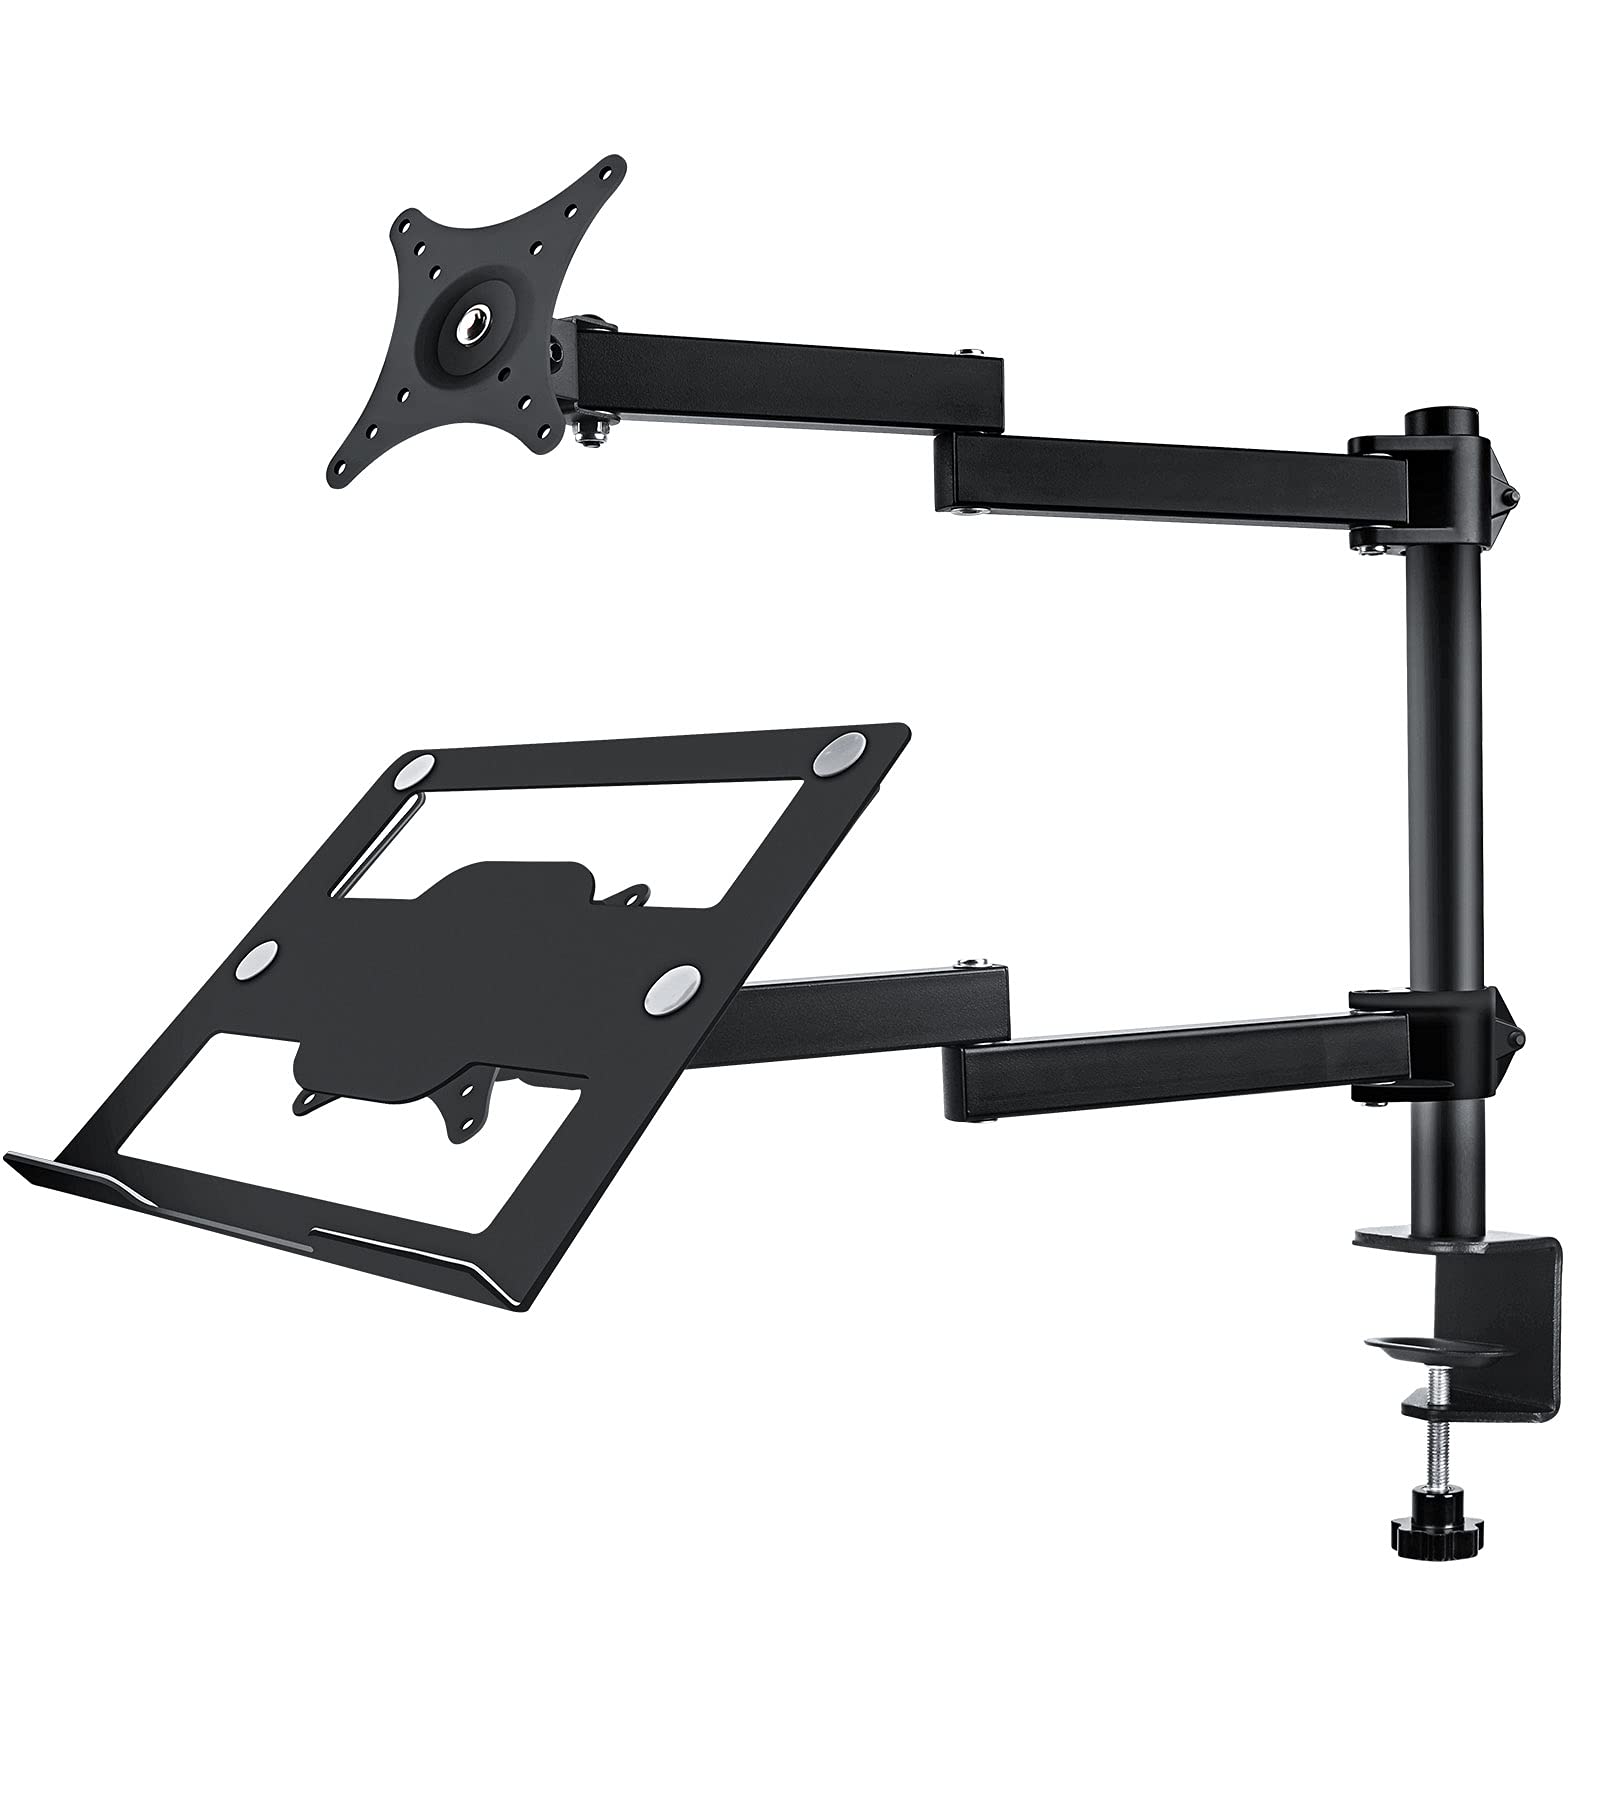 Samyoung Dual Monitor Stand, Heavy-Duty Monitor Mount for 2 Monitors, Fully Adjustable Monitor Arm & Laptop Mount for Desk with Max VESA 100x100mm ...